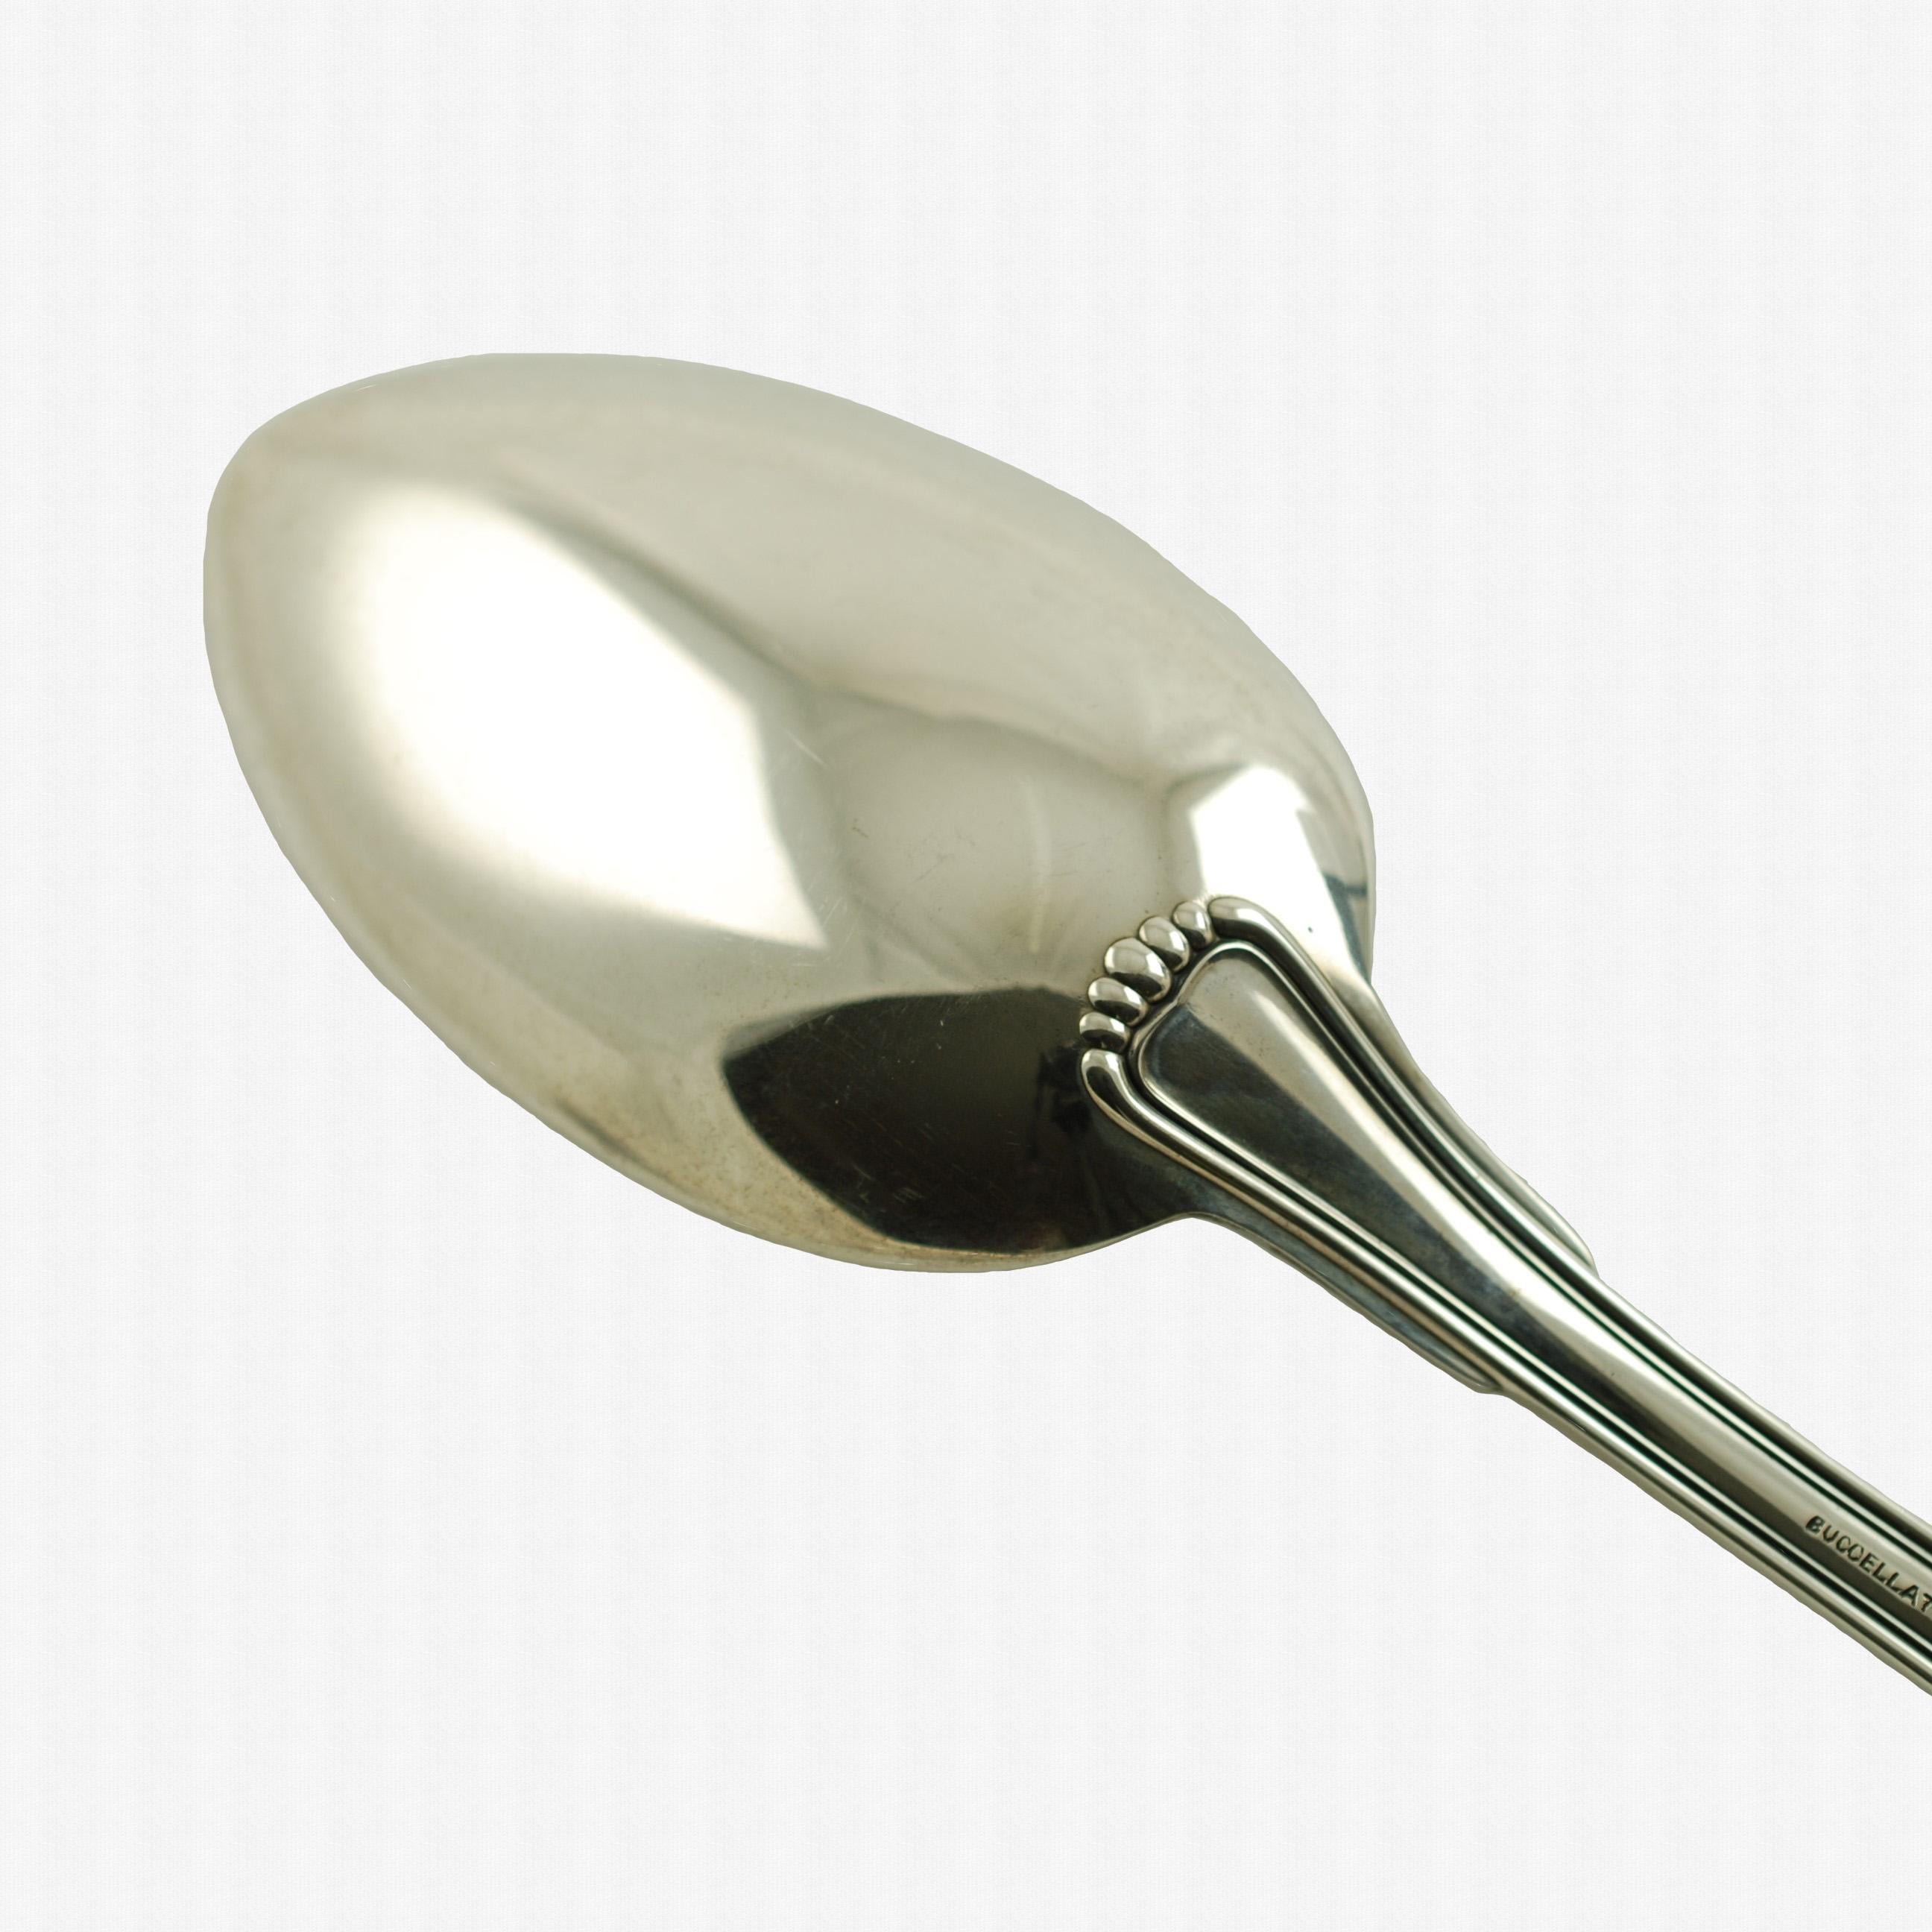 who invented the spoon and fork